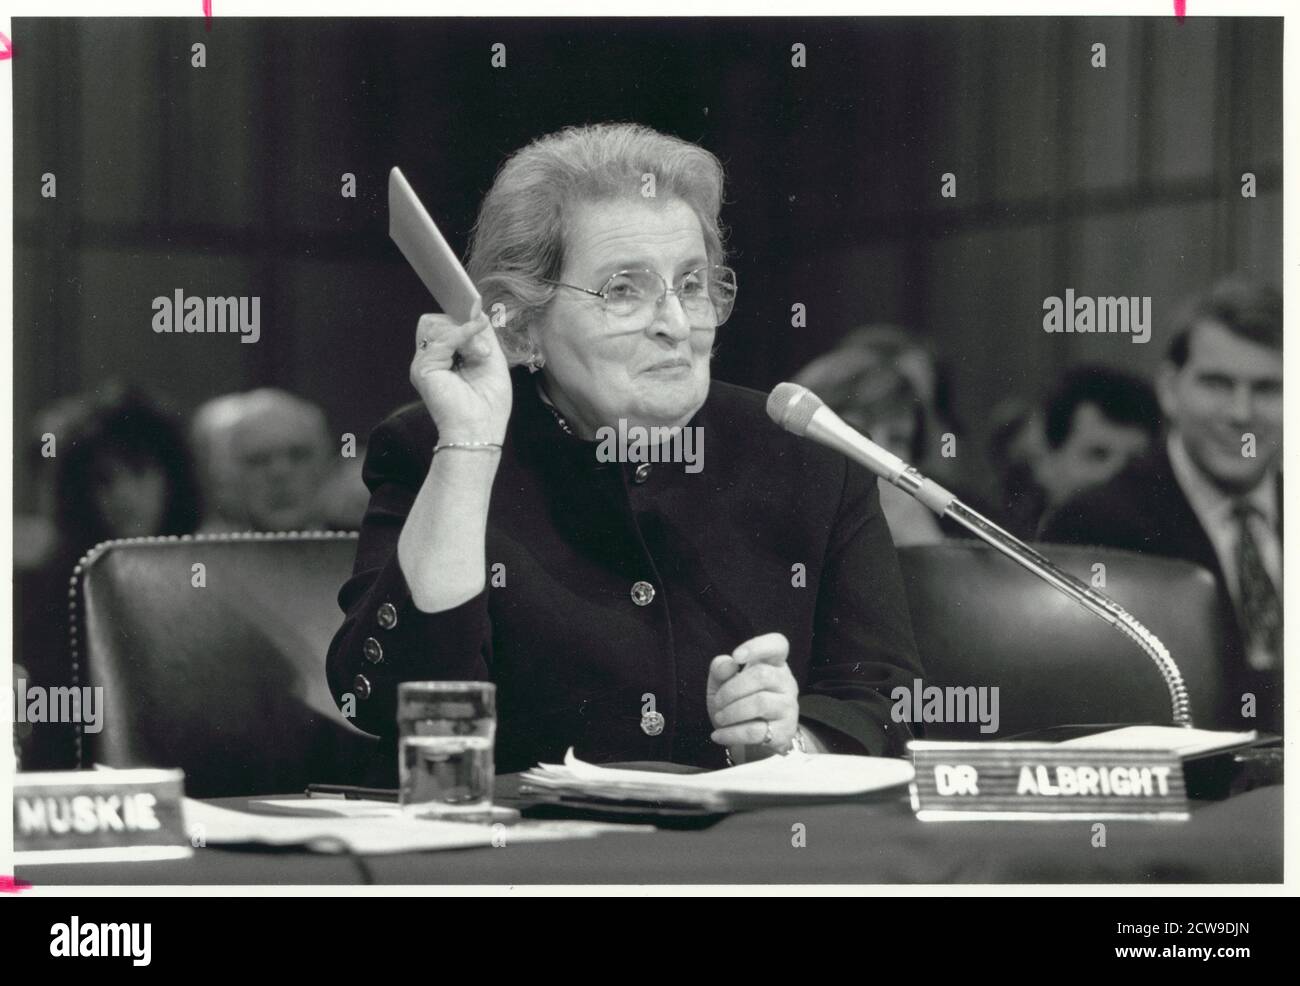 Madeleine Korbel Albright (b. 1937) holds up a copy of the United Nations Charter during her confirmation hearing before the United States Senate Foreign Relations Committee to become US ambassador to the United Nations, Washington, DC, 1/23/1993. (Photo by Michael R Jenkins/CQ Roll Call Photograph Collection/RBM Vintage Images) Stock Photo